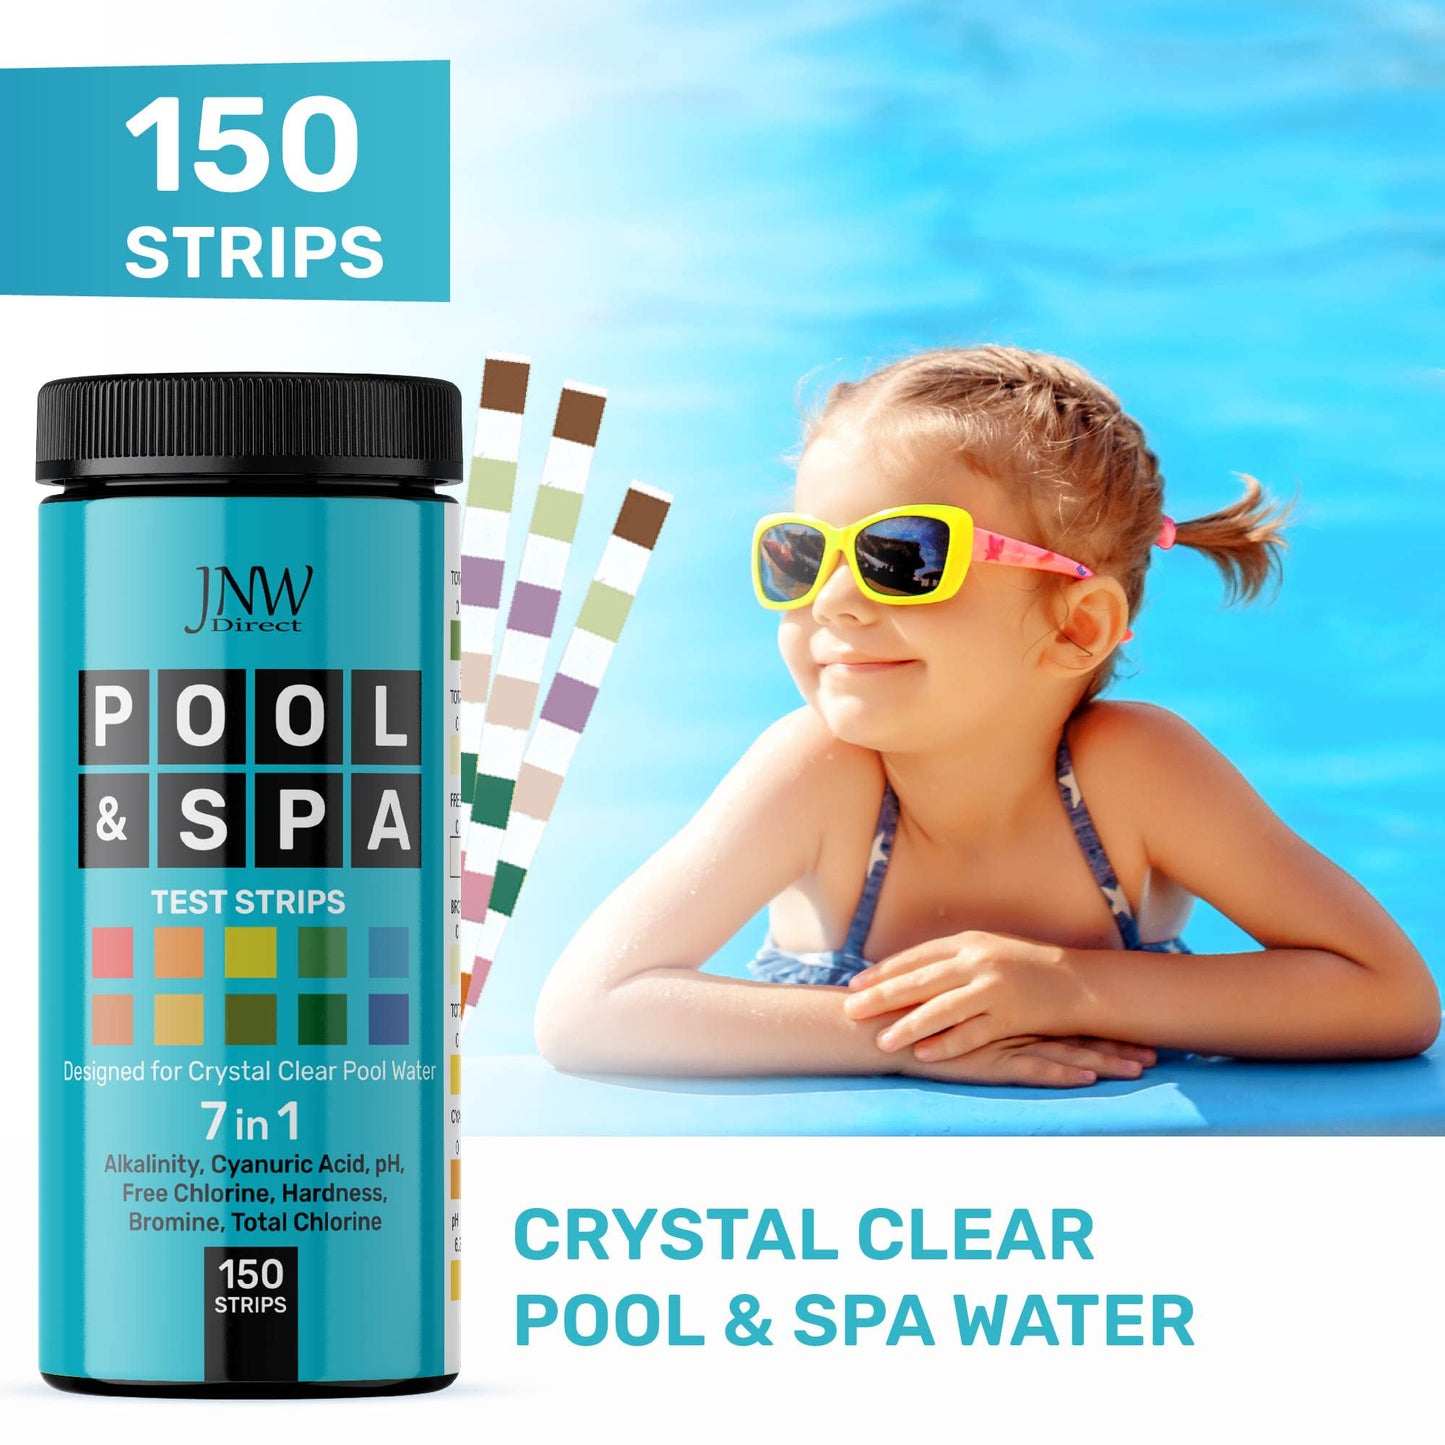 Pool Test Strips 7-in-1, 150 Quick and Accurate Pool and Hot Tub Test Strips - Pool Water Testing Kit for Chlorine, Bromine, pH, Hardness, More - All in 1 Swimming Pool Test Strips by JNW